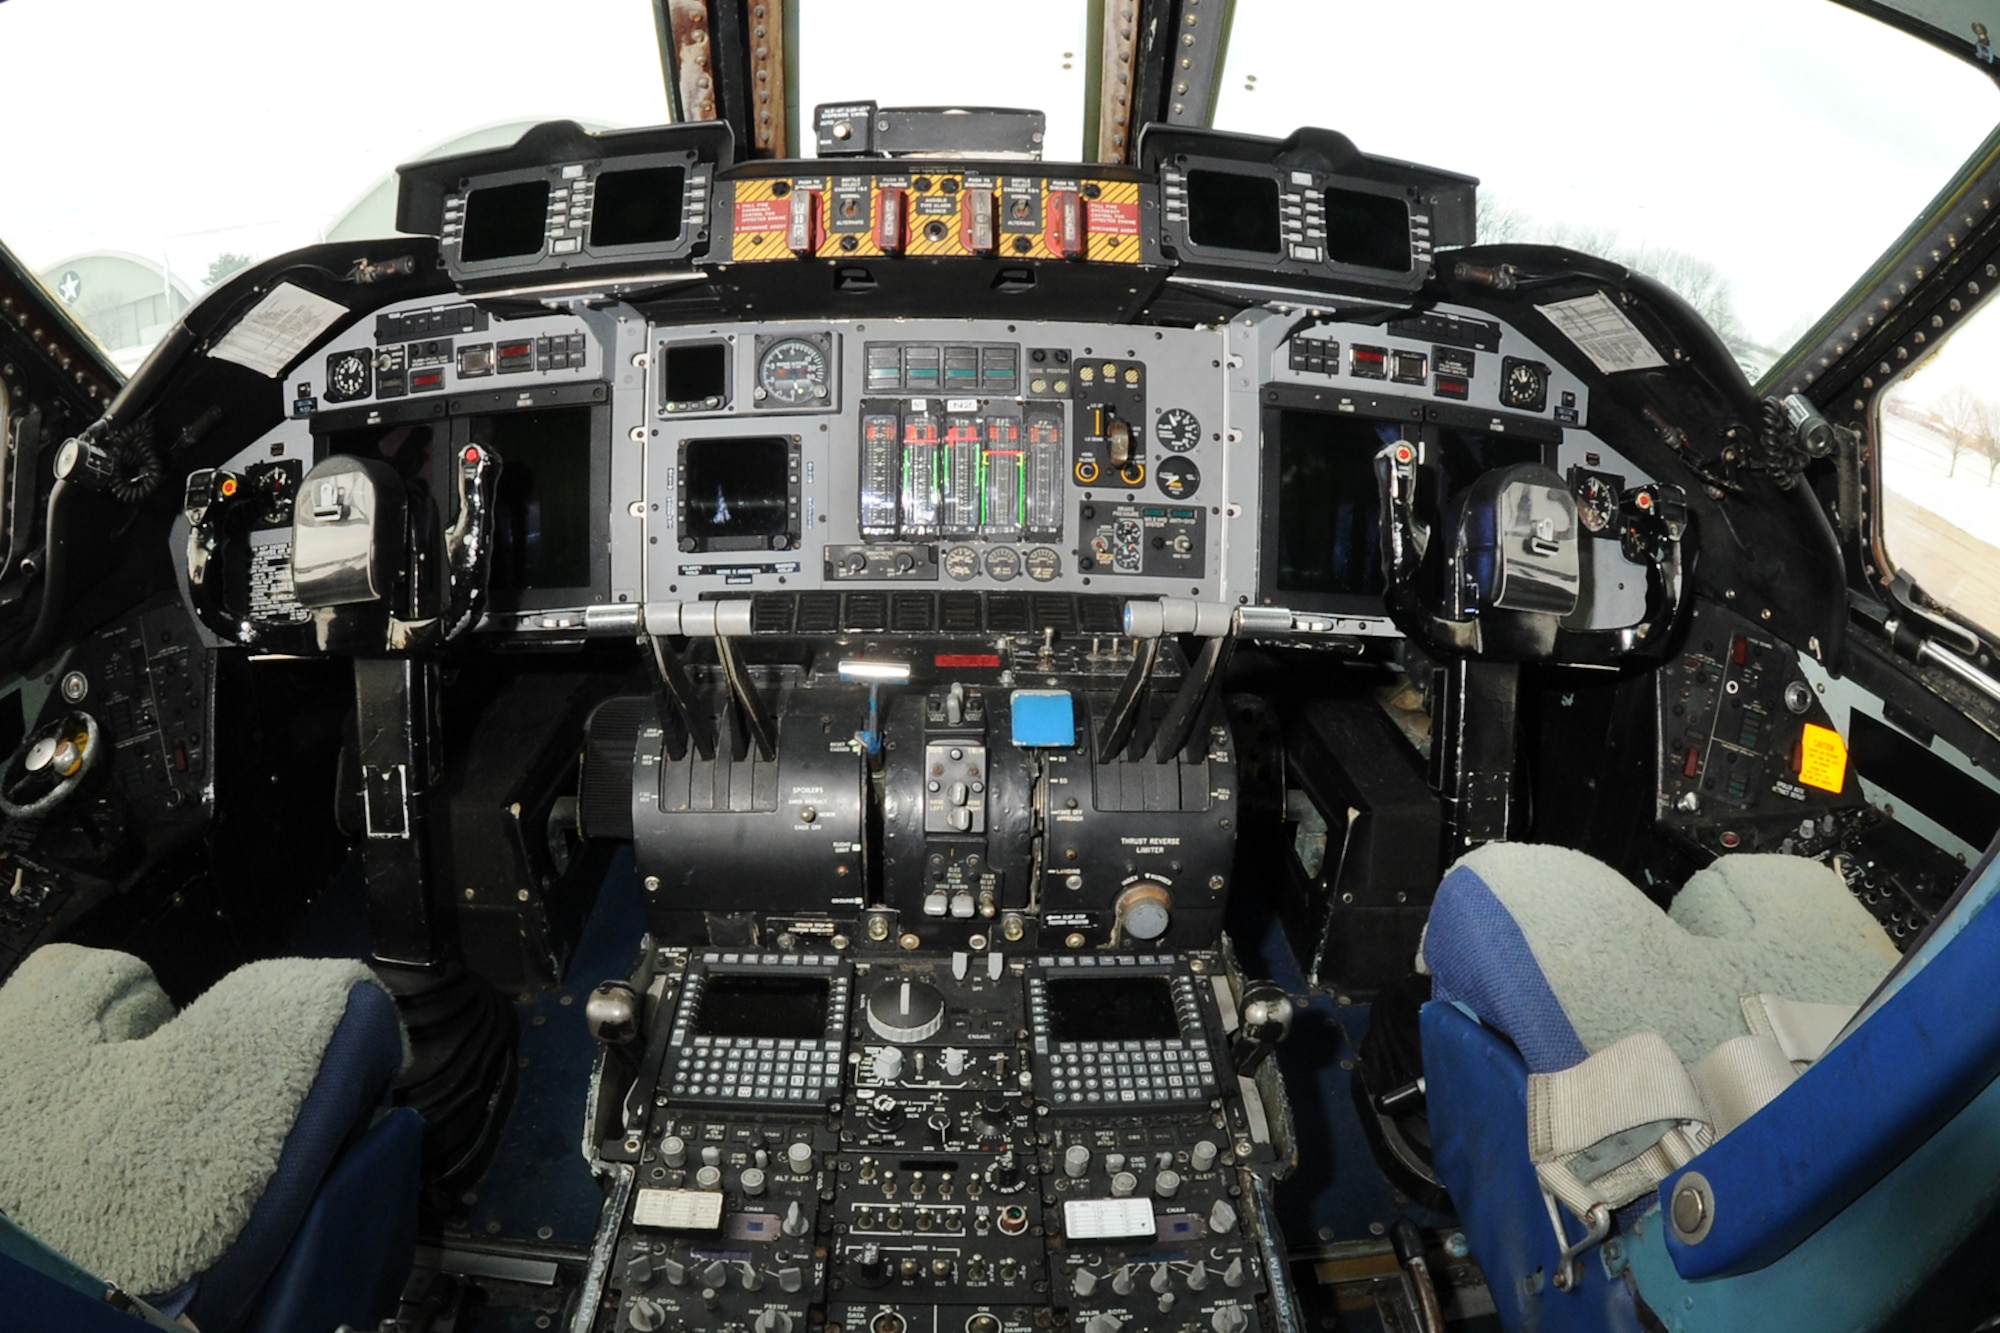 DAYTON, Ohio - Lockheed C-141C cockpit at the National Museum of the United States Air Force. (U.S. Air Force photo by Ken LaRock)
